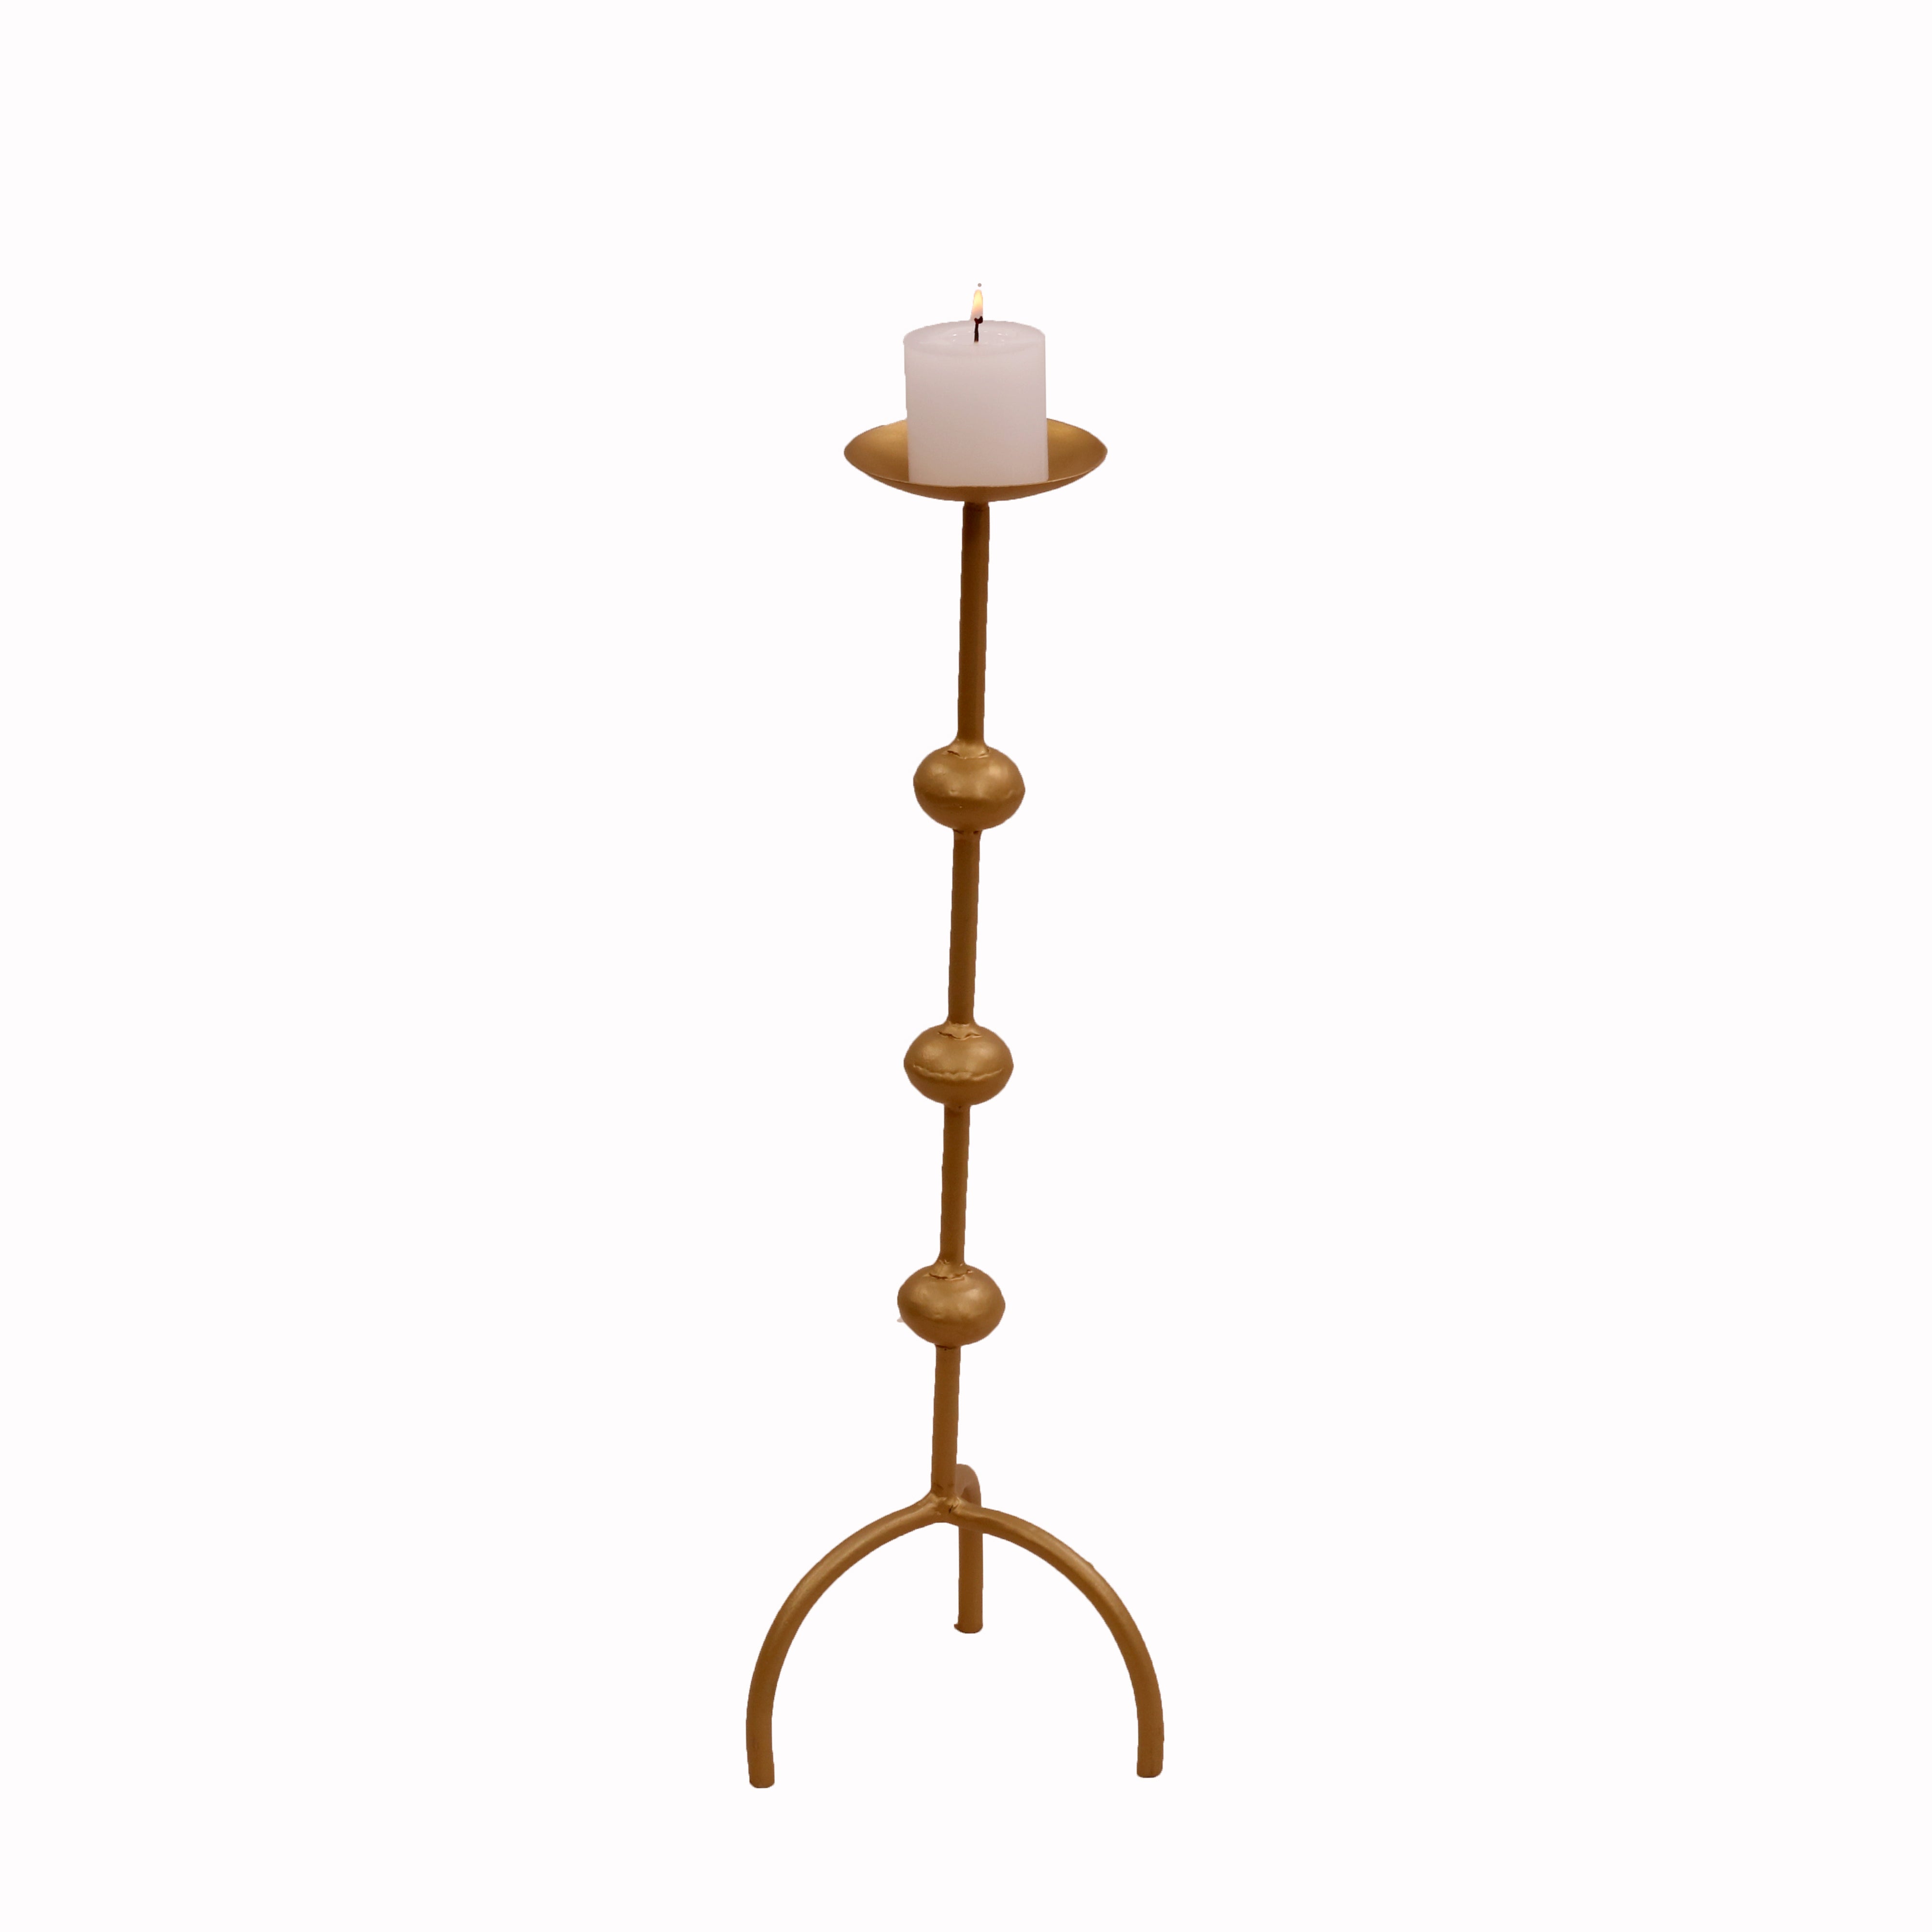 Rounded Beads Candle Stand Candle Holder